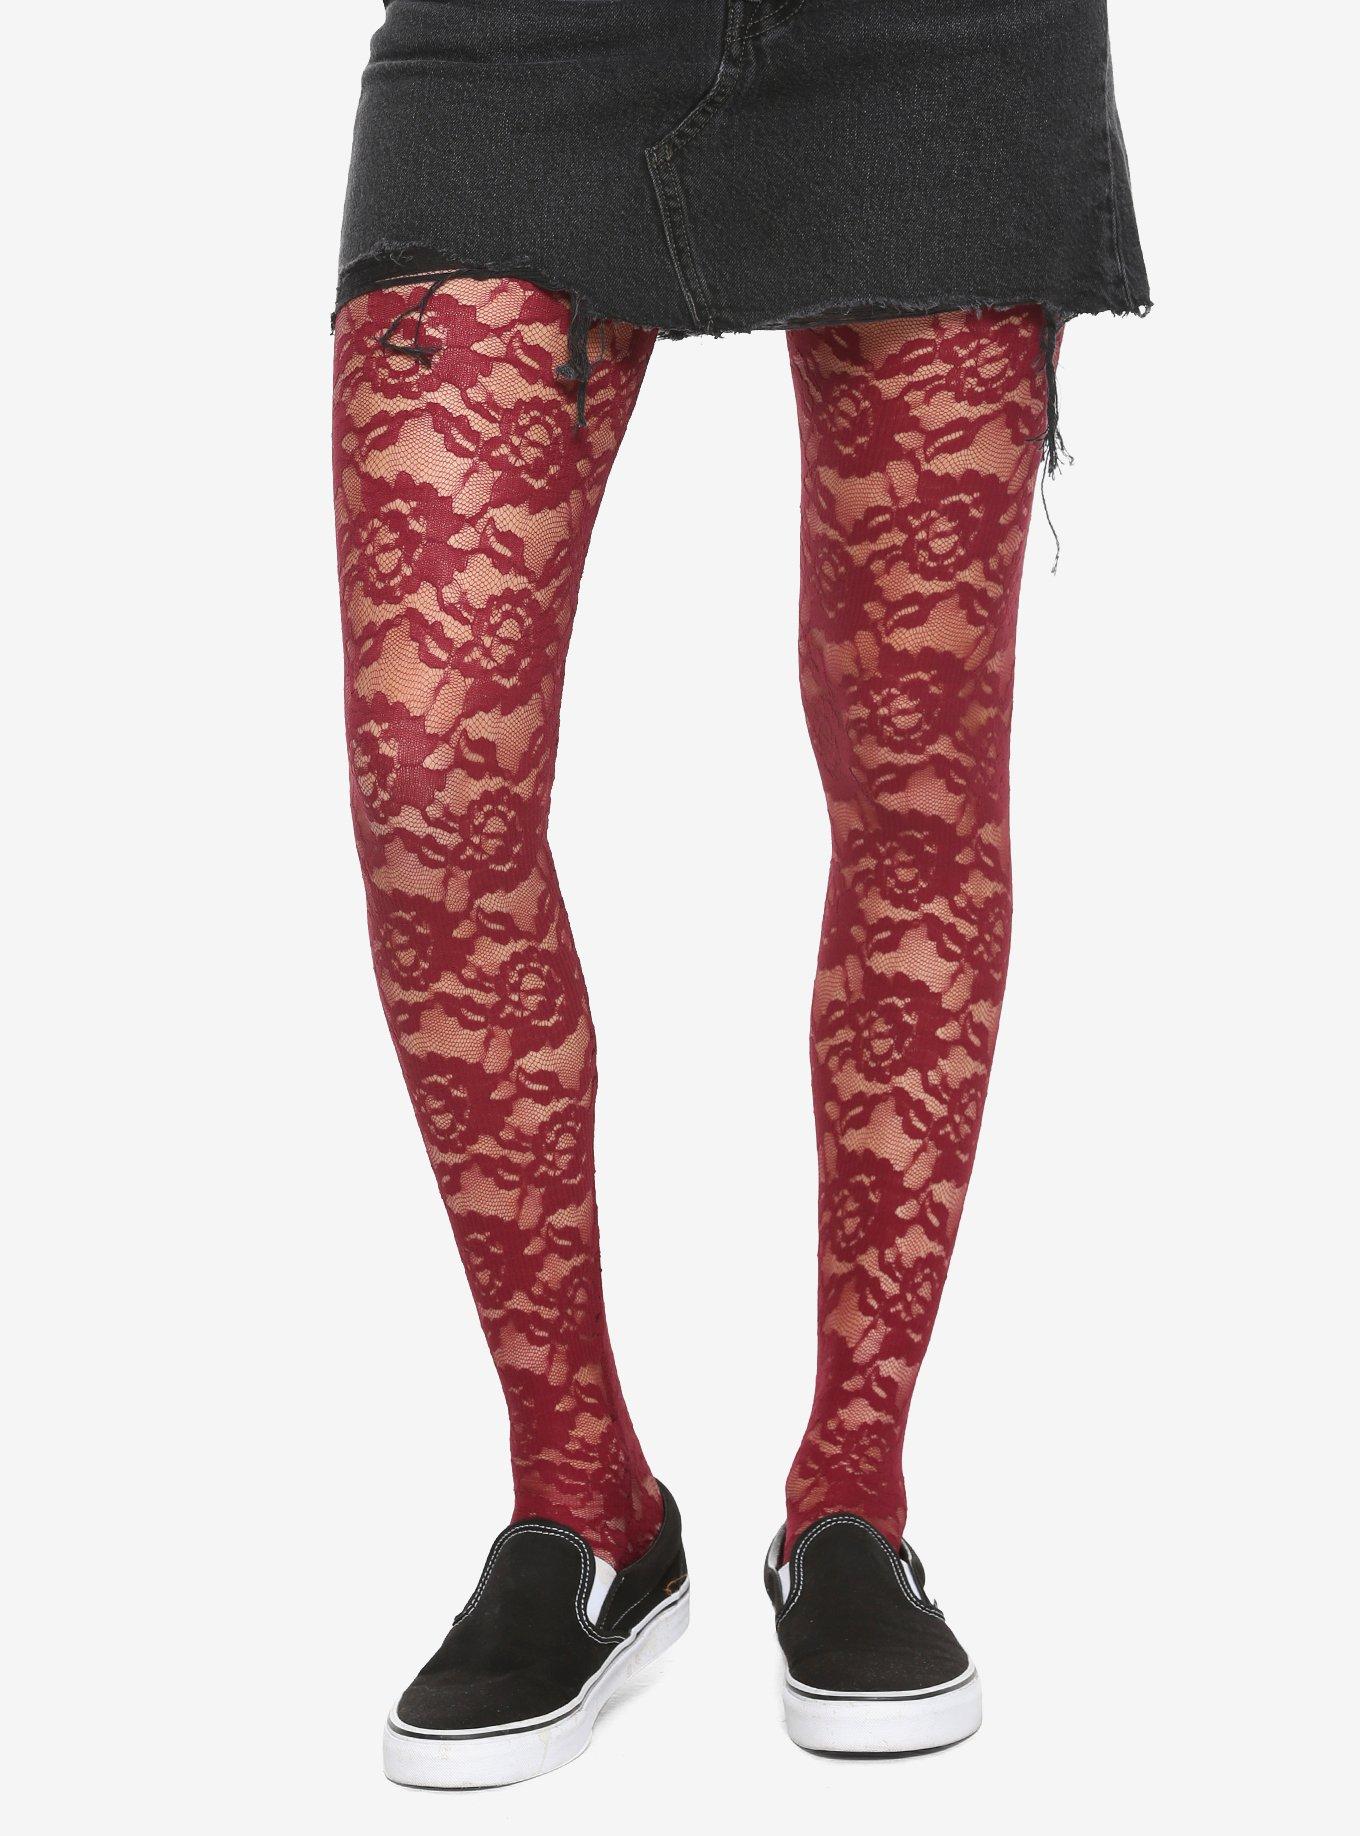 Favored Feature Burgundy Lace Fishnet Tights